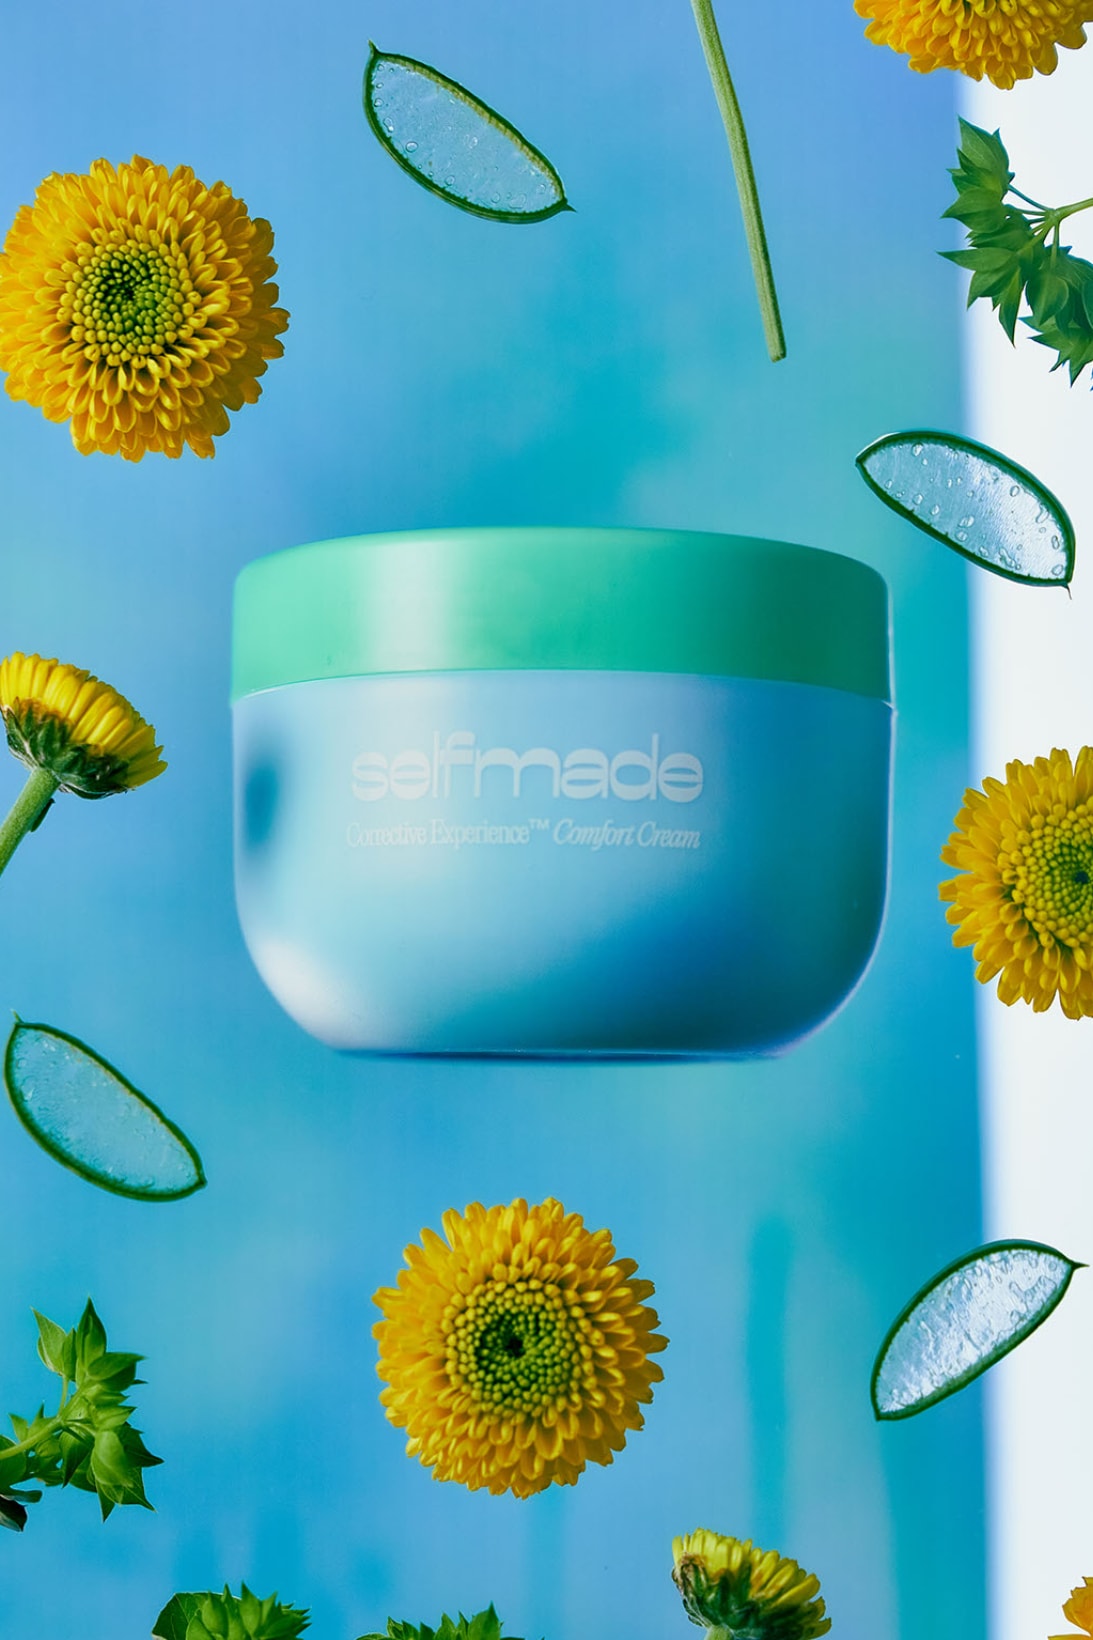 selfmade Corrective Experience Comfort Cream release